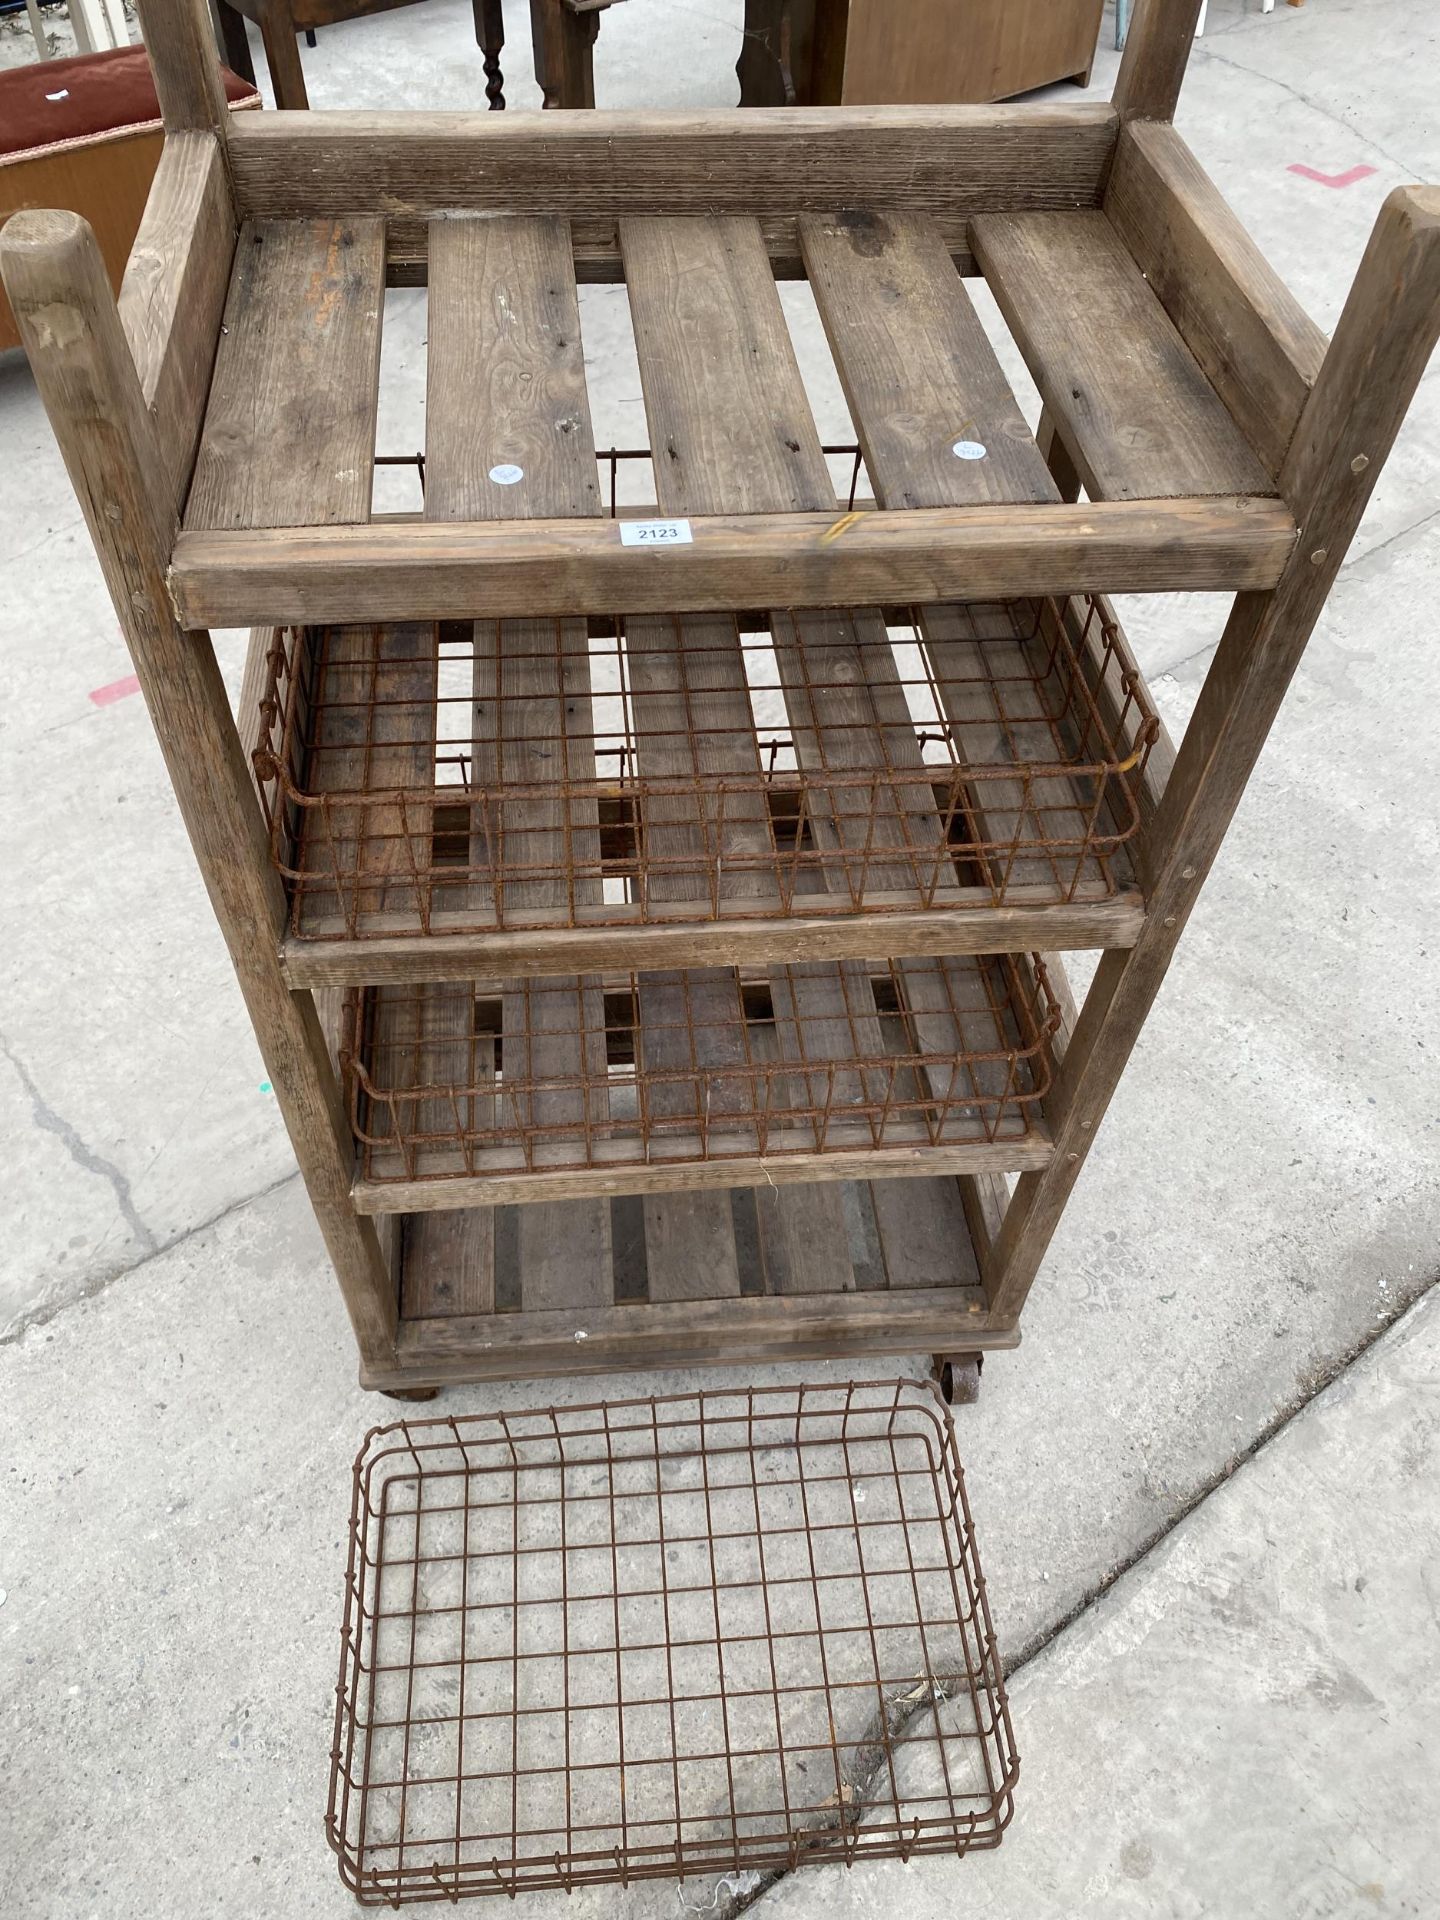 A TALL RUSTIC FOUR TIER WOODEN FOUR WHEELED STAND WITH WIRE BASKET TRAYS - Image 5 of 6